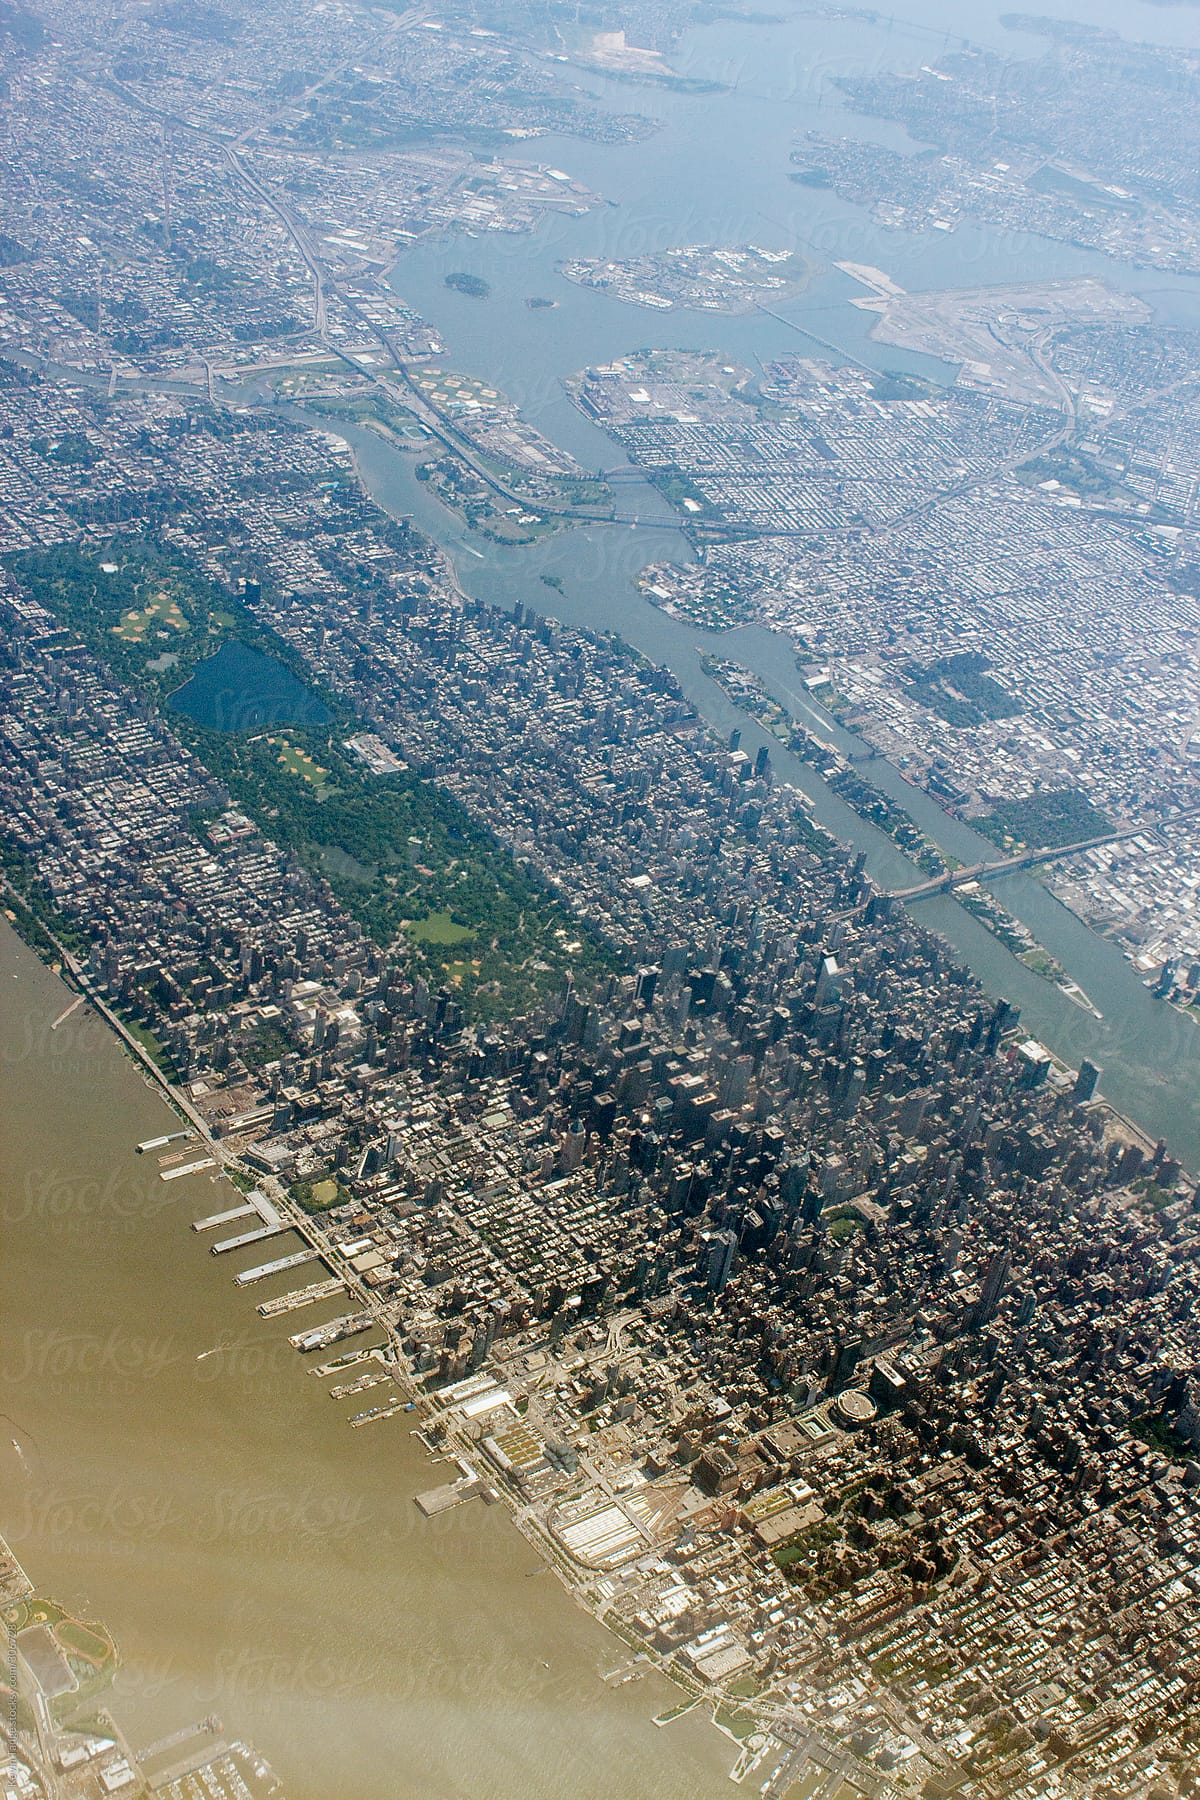 Flying over Manhattan and New York